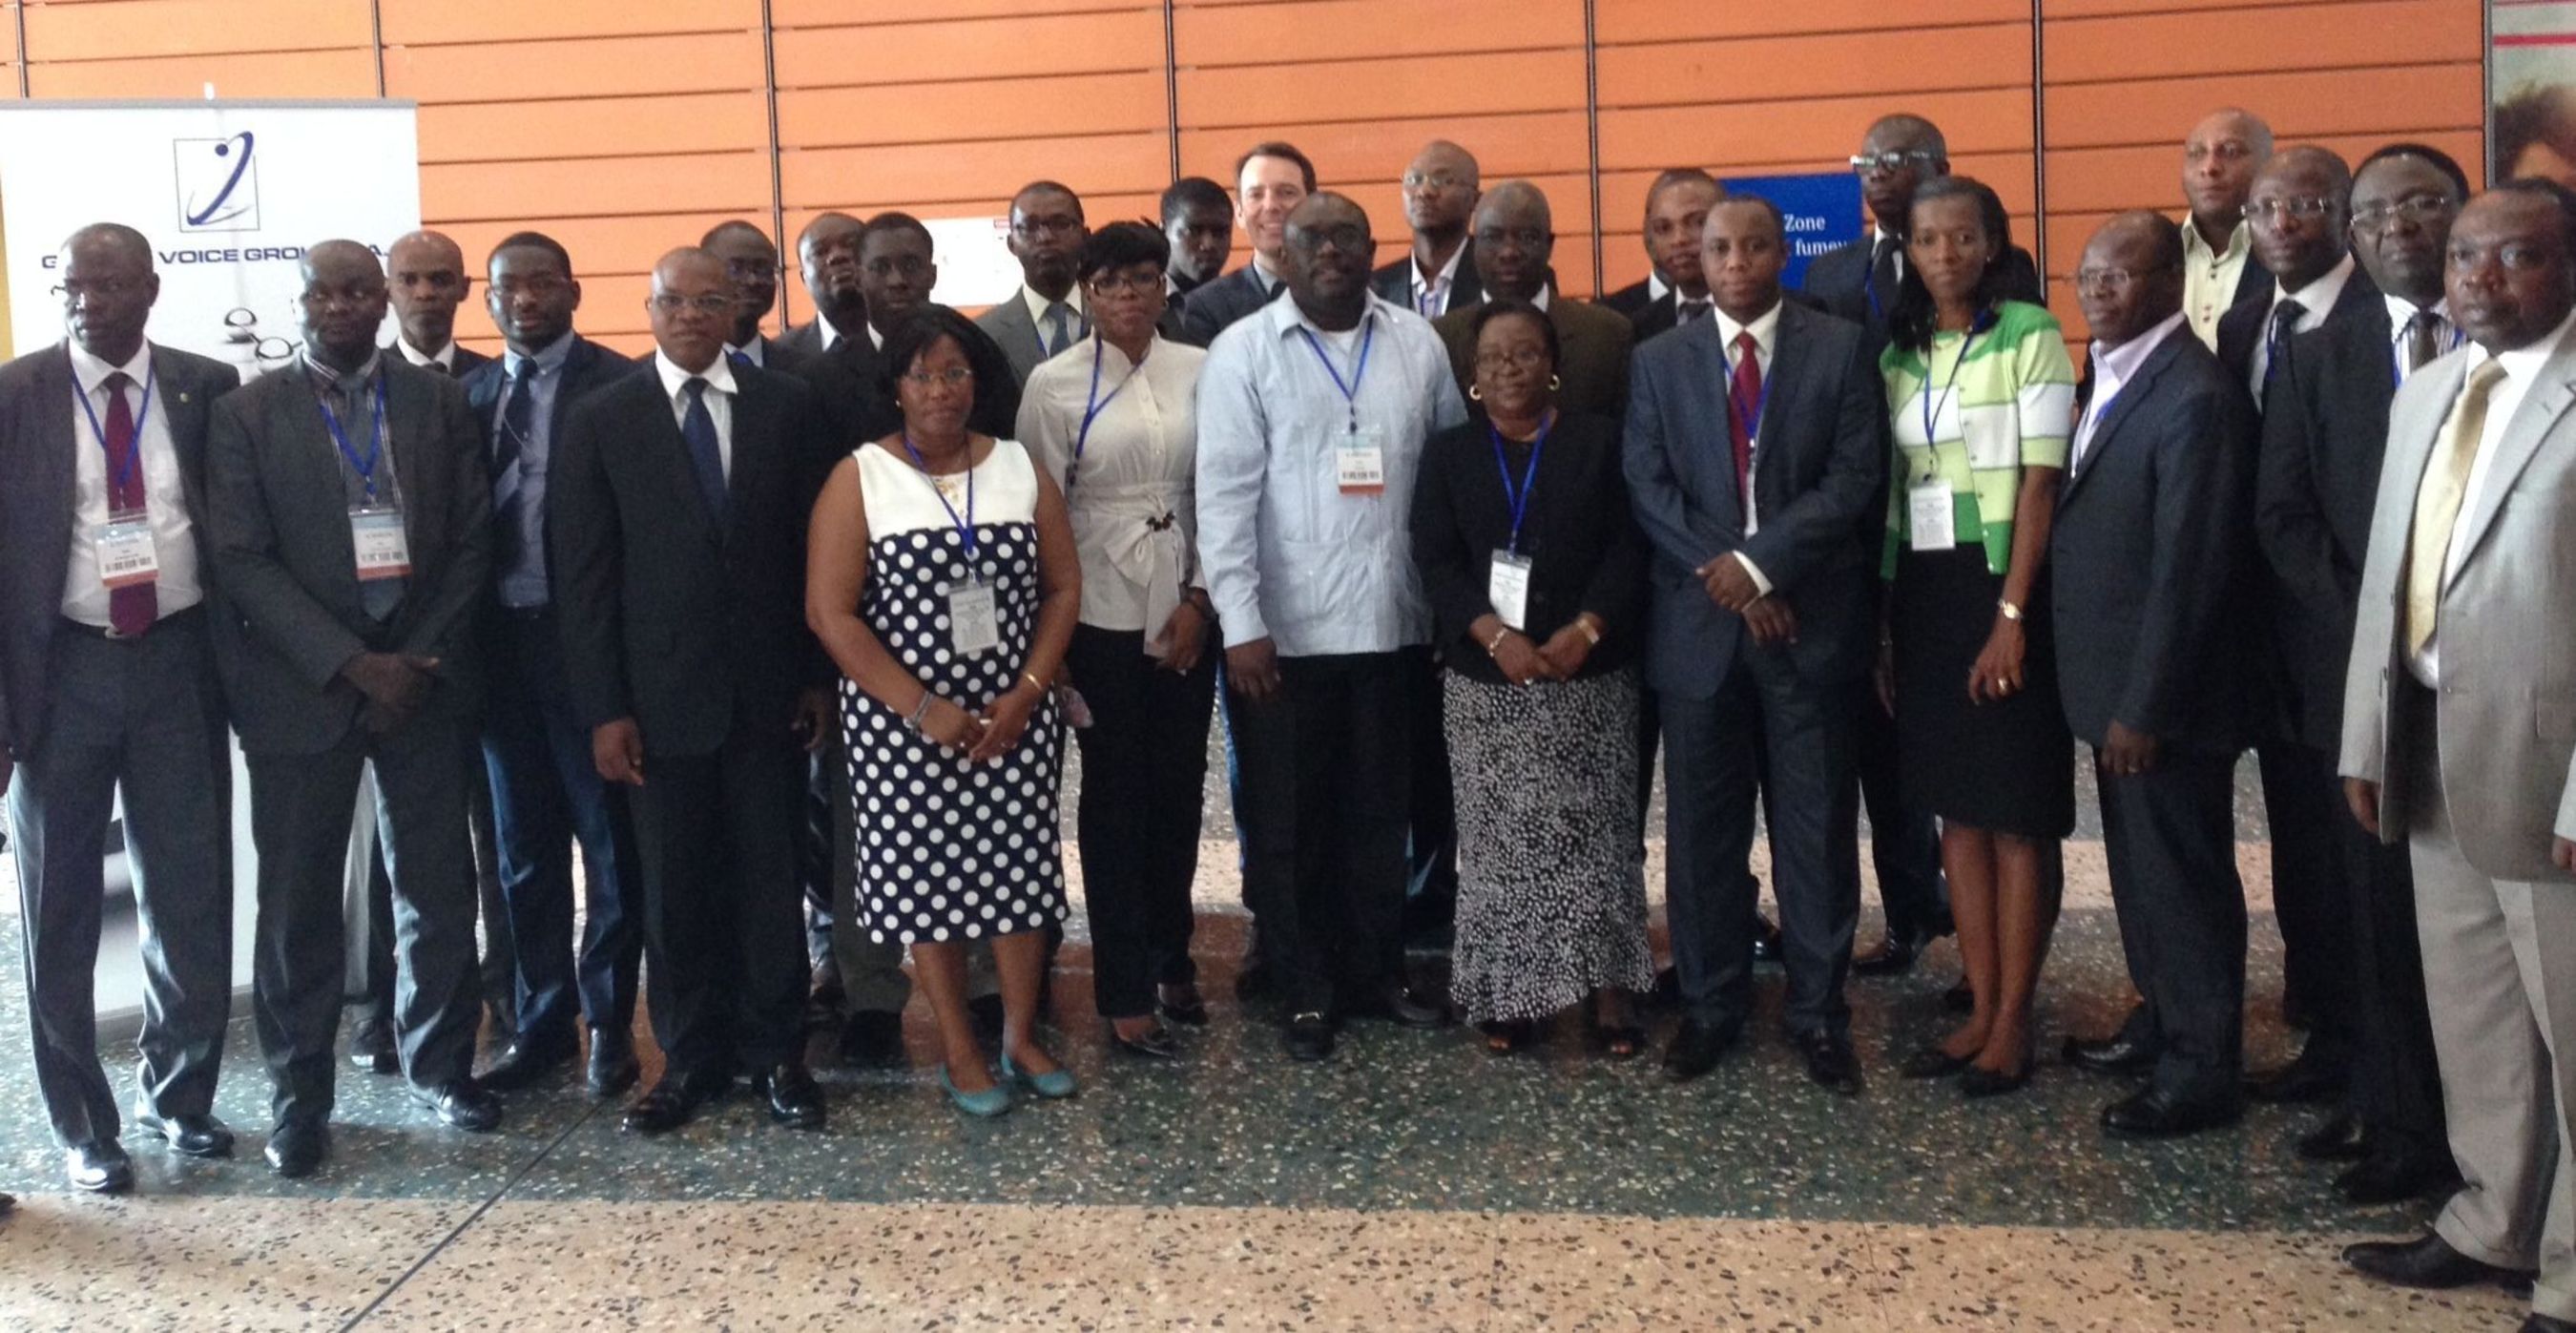 Participants at the GVG-SGS West African Workshop (PRNewsFoto/Global Voice Group)